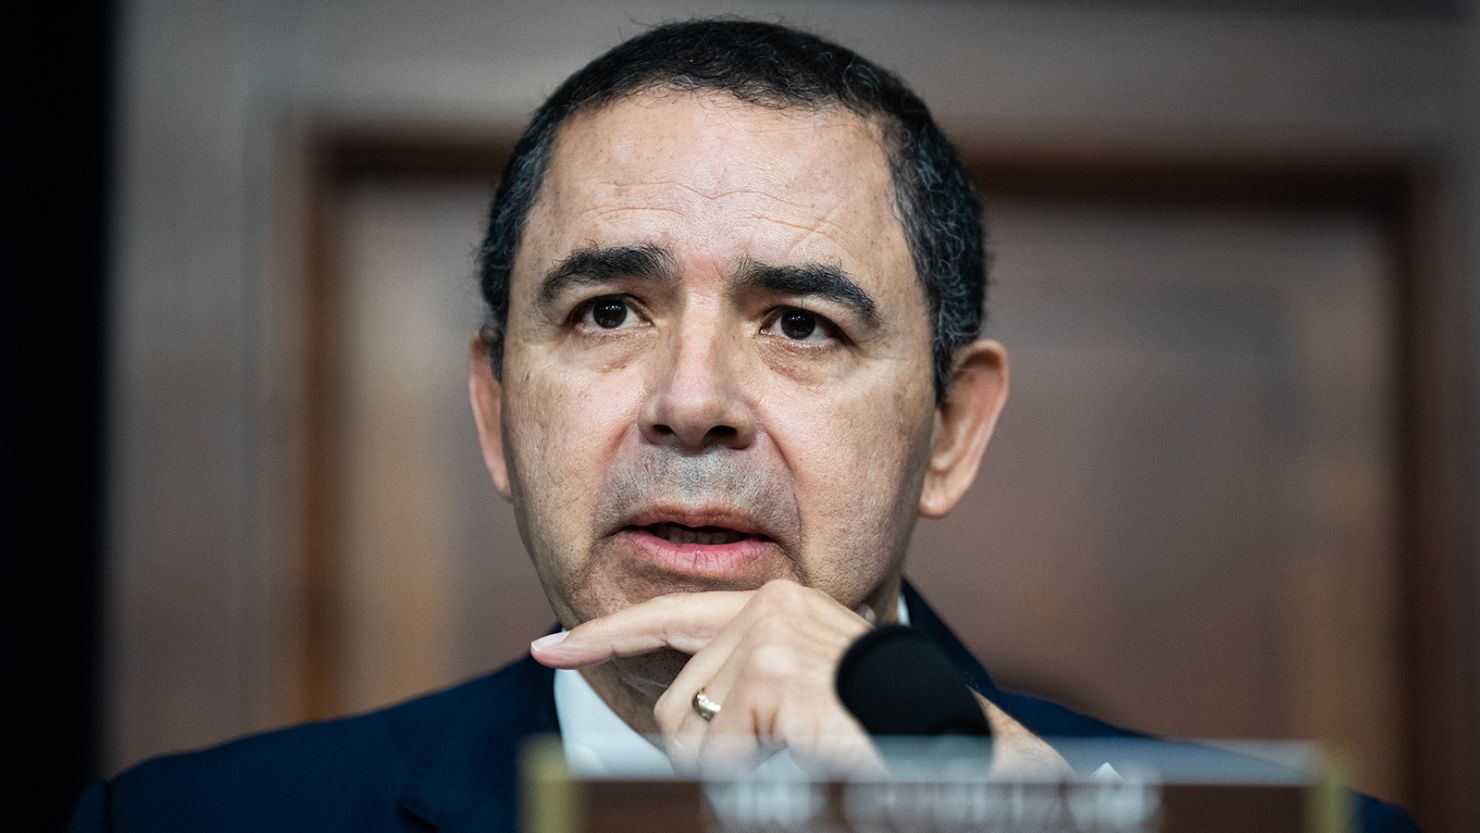 Democratic Rep. Henry Cuellar of Texas speaks during the House Appropriations Subcommittee on Homeland Security hearing on the "Fiscal Year 2025 Request for the Department of Homeland Security," in the Rayburn building on Wednesday, April 10, 2024.